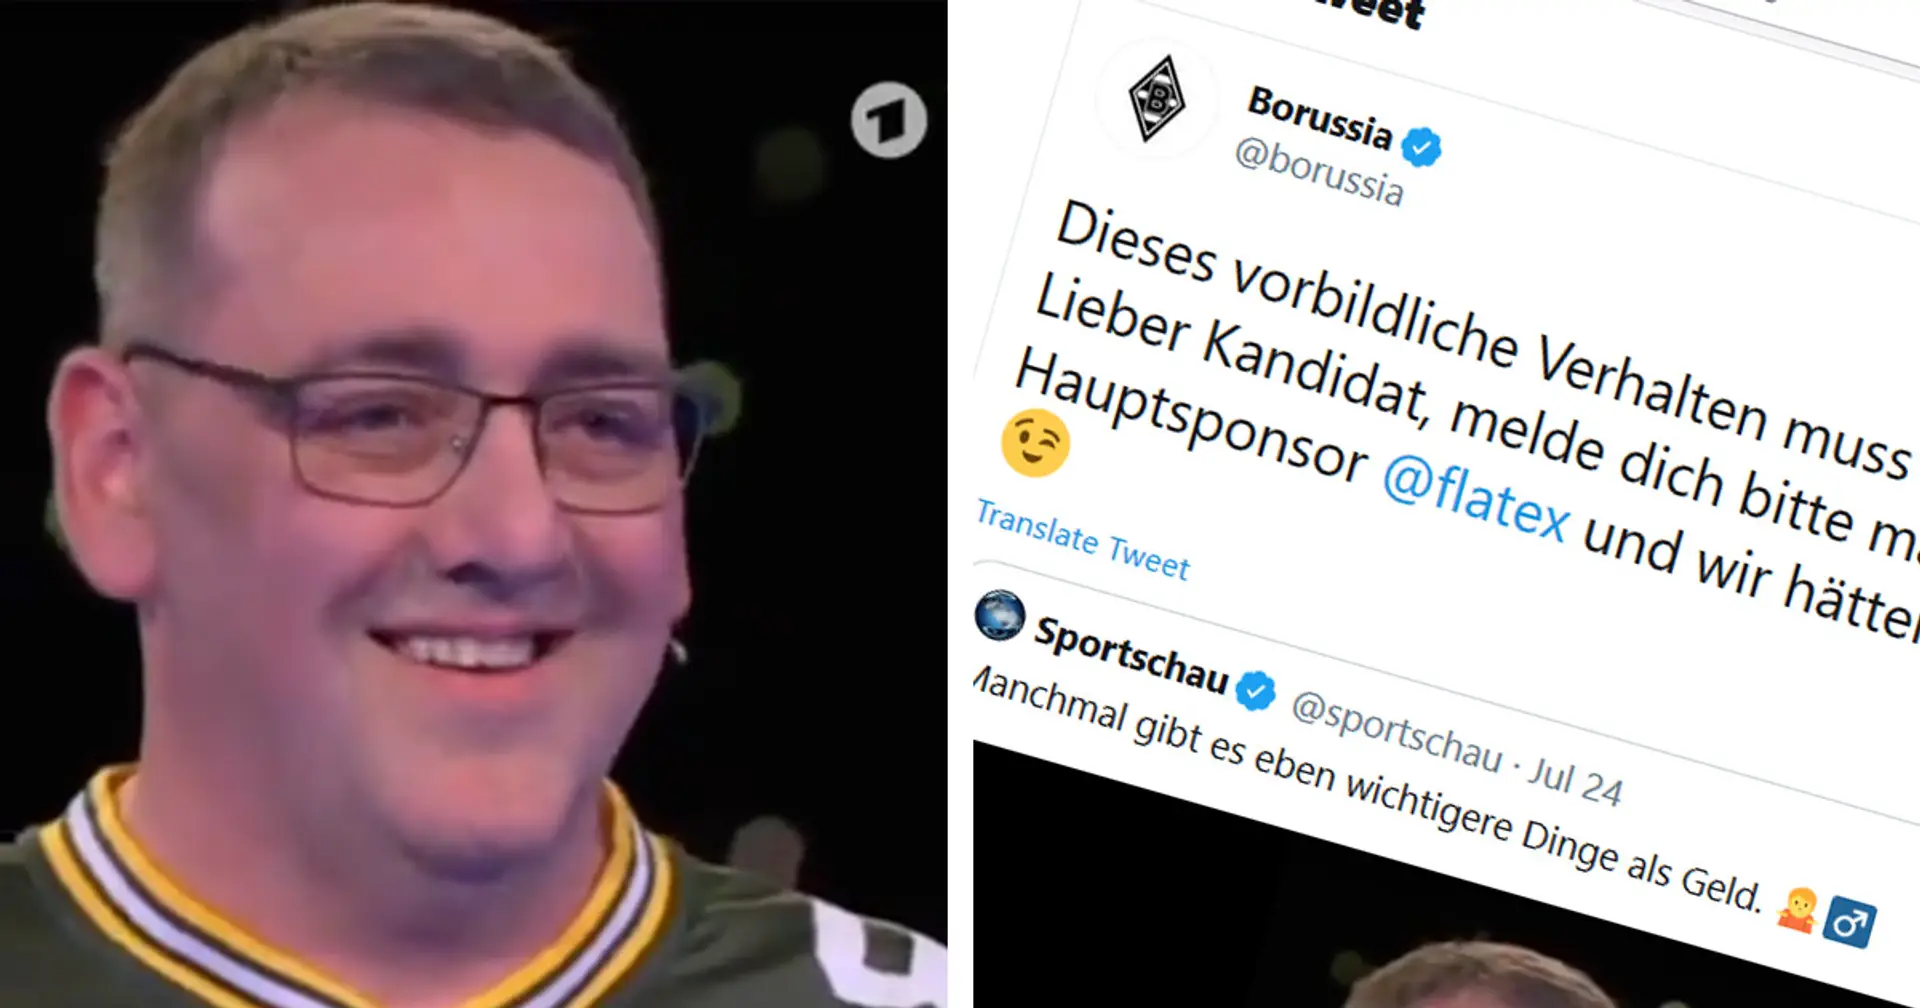 Borussia M'gladbach decide to reward fan who didn't want to mention rival's on TV for his 'exemplary behaviour'